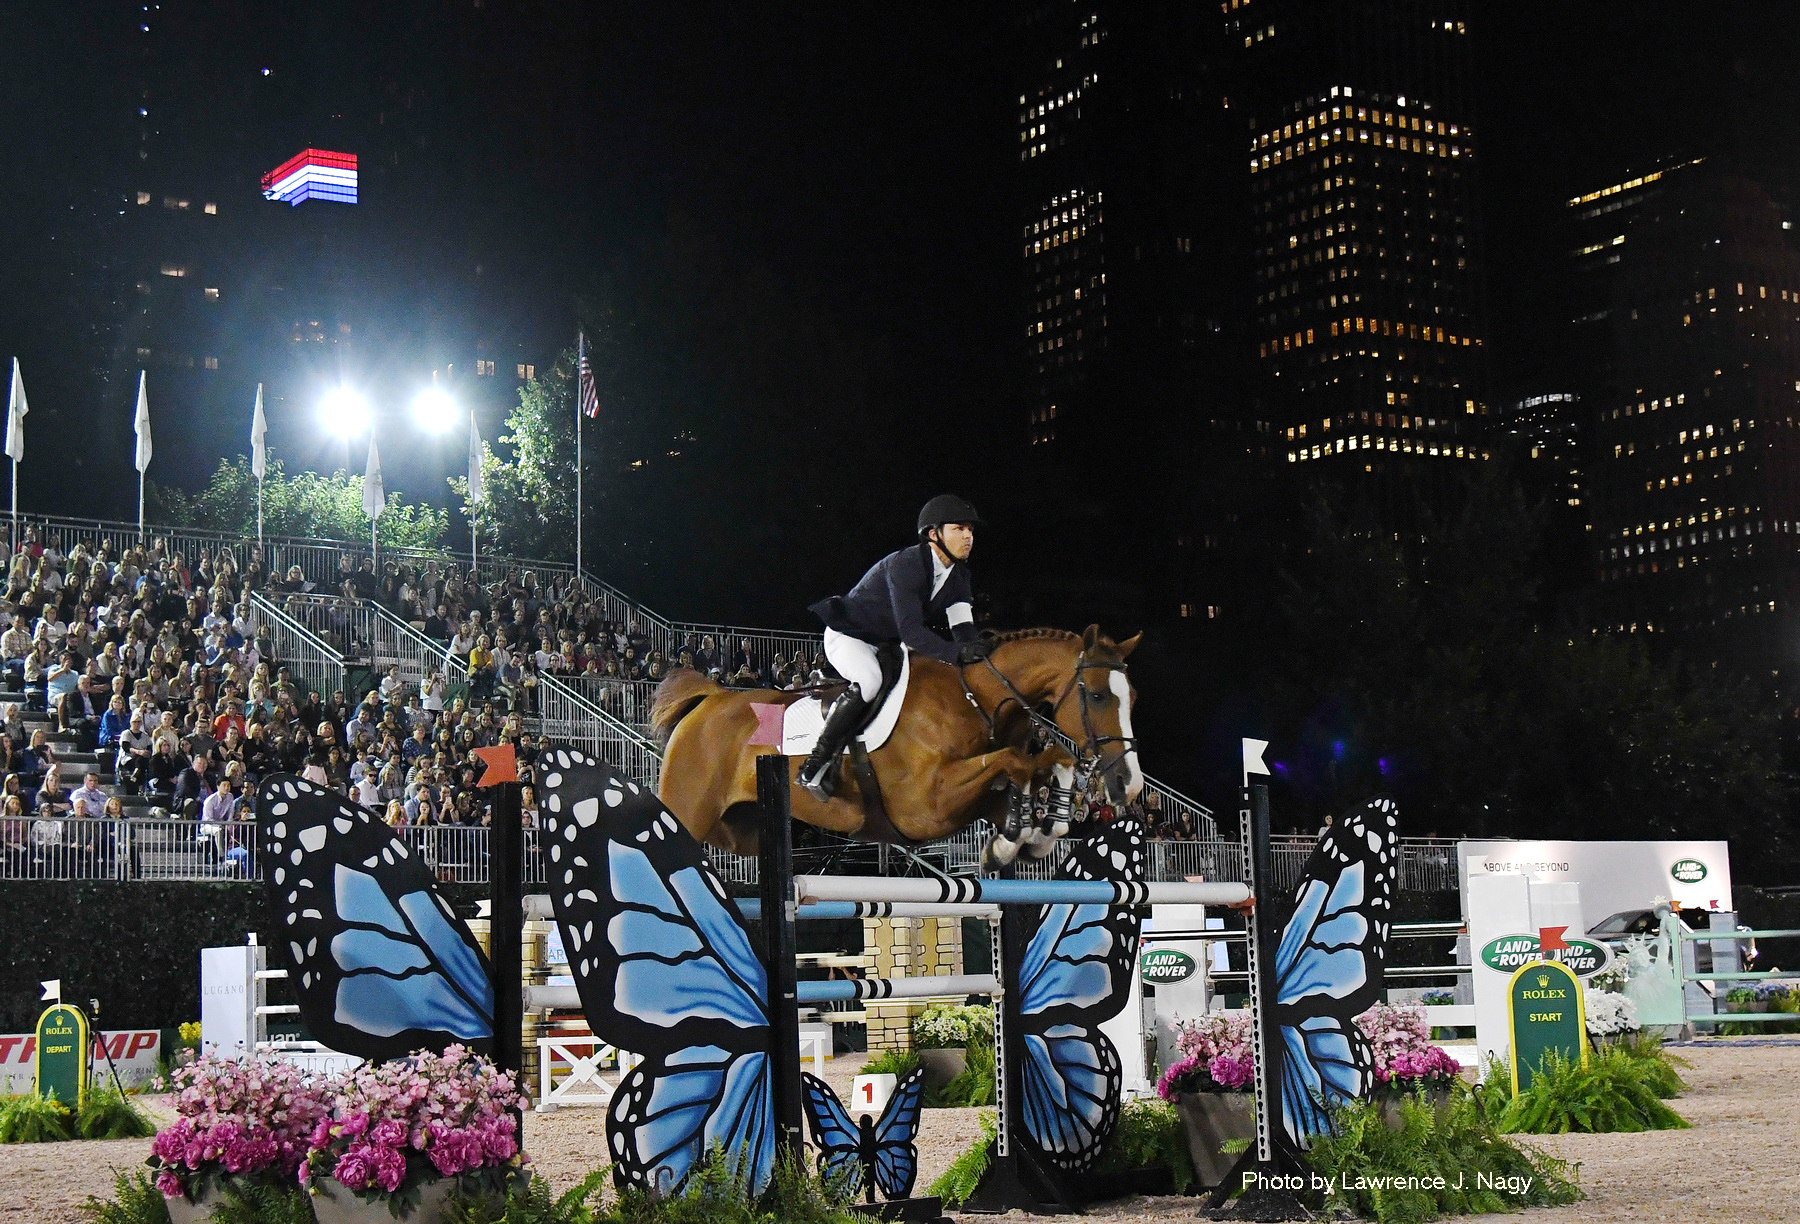 Postcard: Show Jumping at the 2017 Rolex Central Park Horse Show